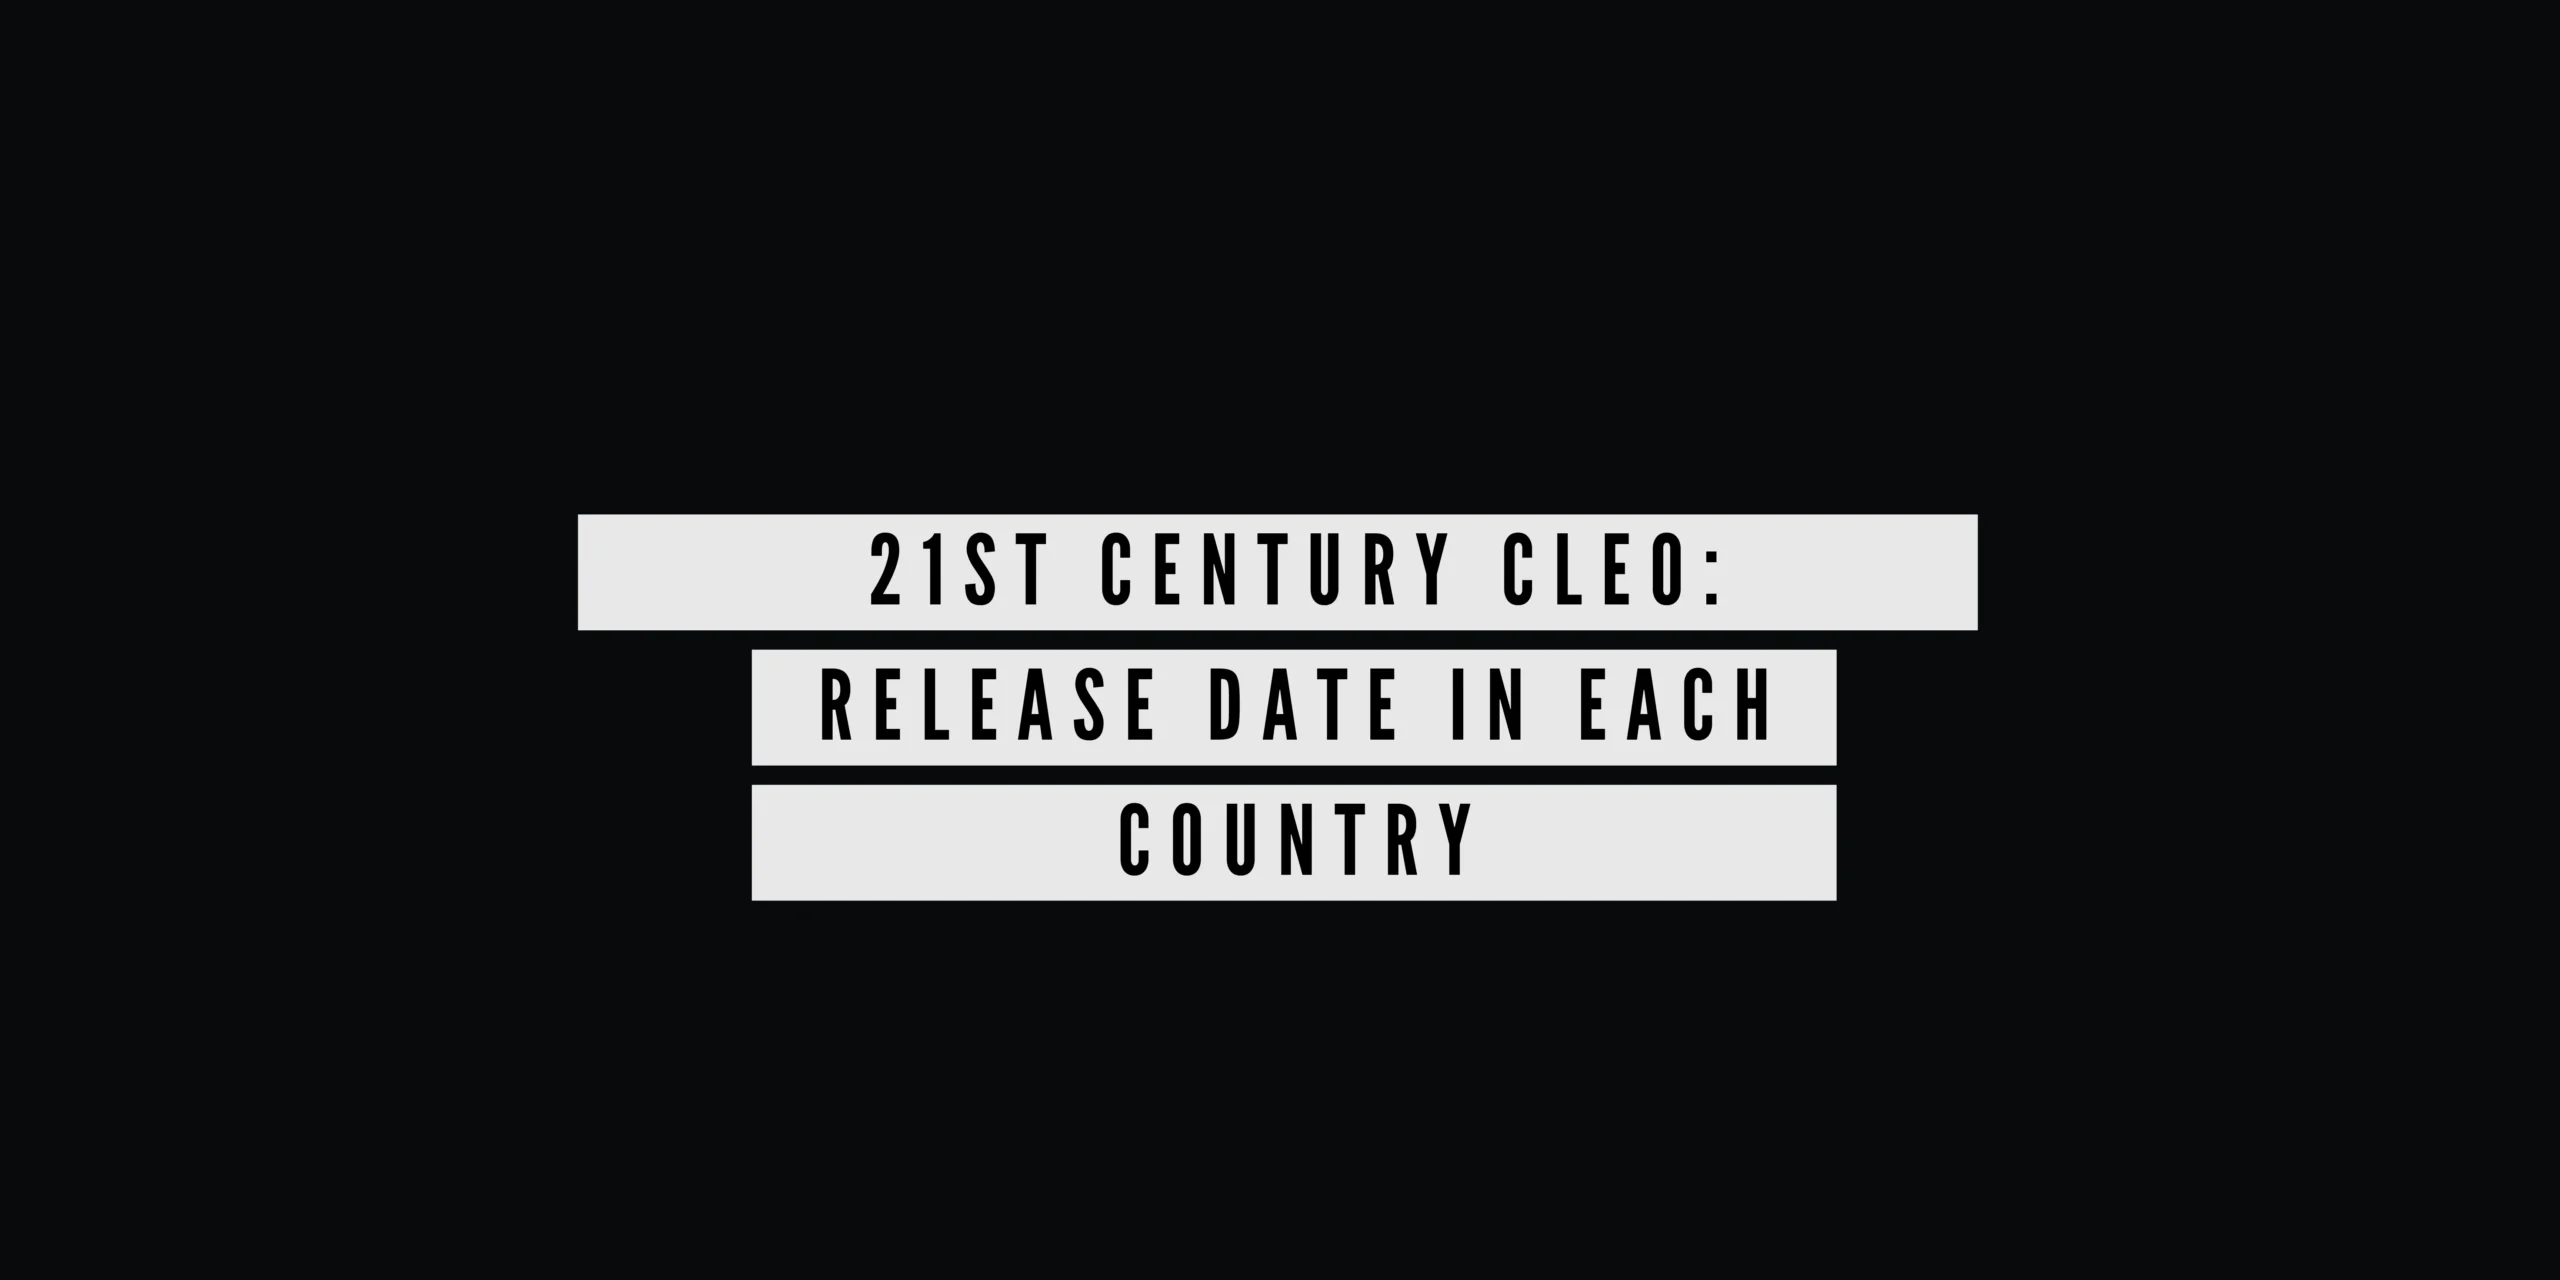 21st Century Cleo Release Date In Each Country